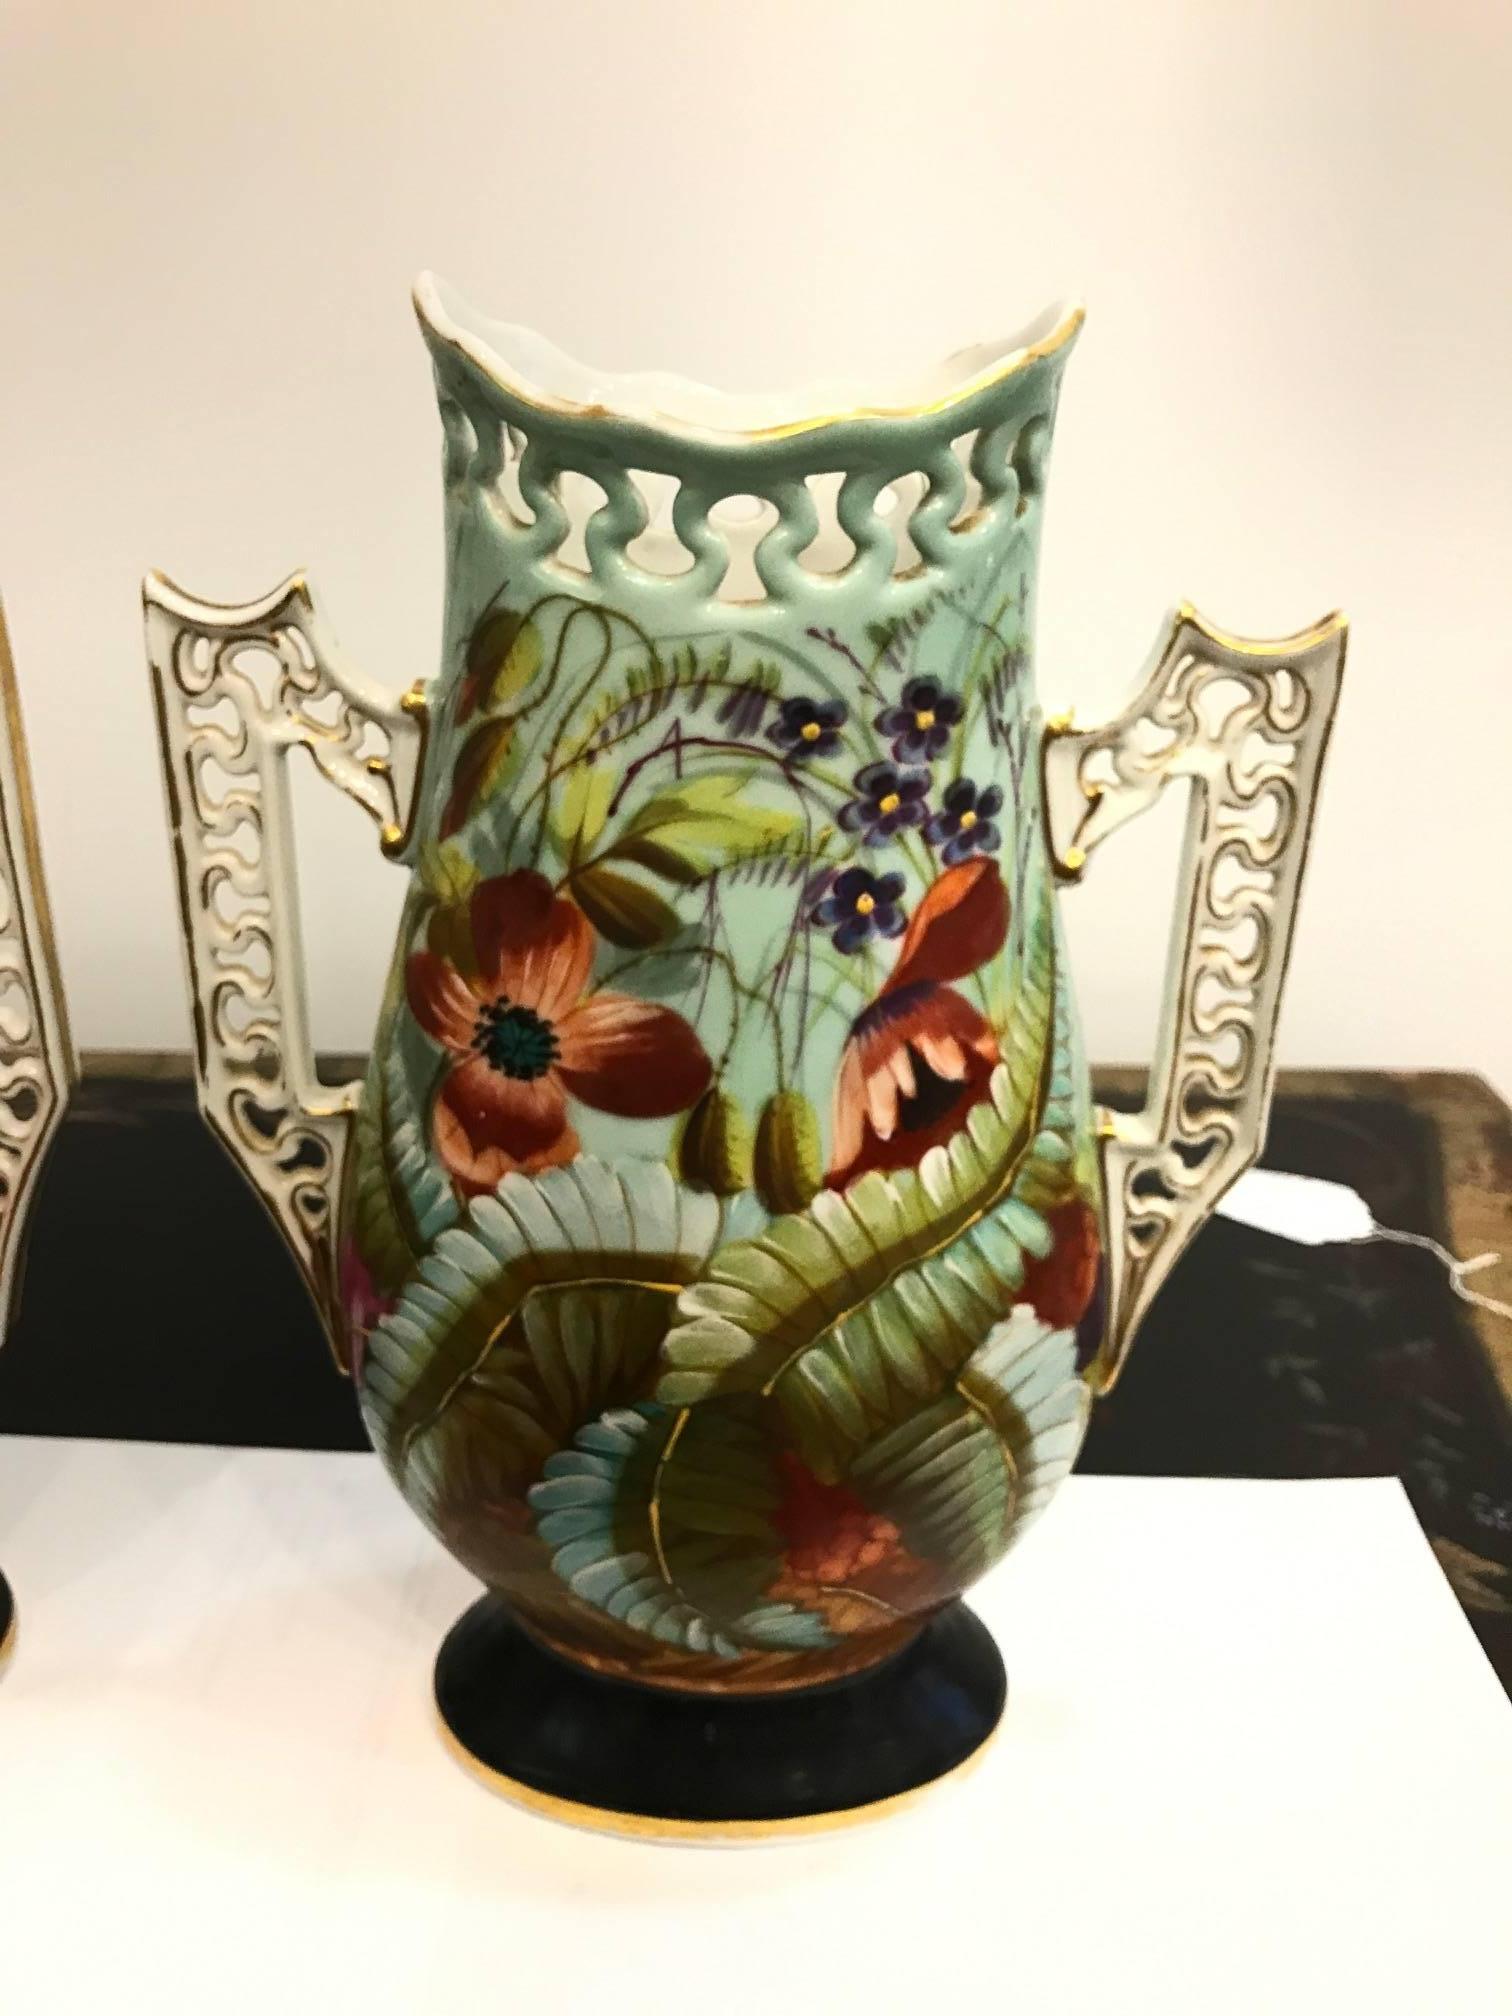 Vibrant pair of Old Paris porcelain botanical vases. Each one hand-painted and are a mirror image of each other. The reticulated handles have gilt decoration and the piercings match along the tops of the vases.